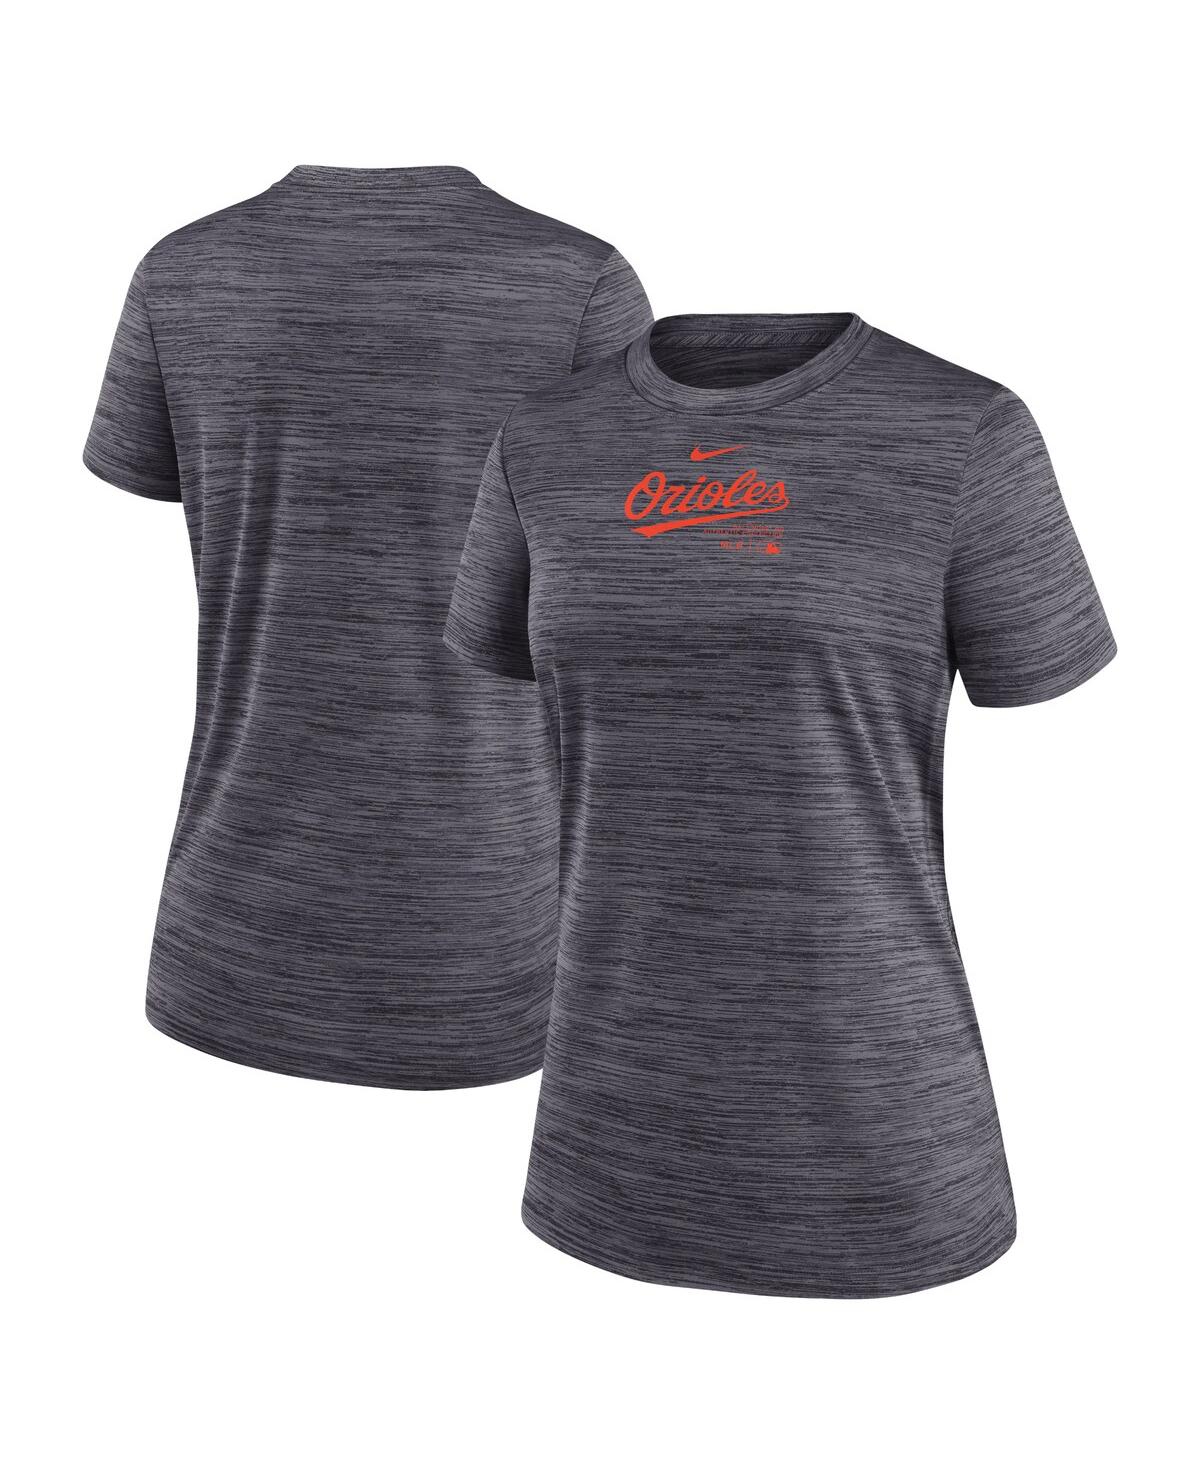 Women's Nike Black Baltimore Orioles Authentic Collection Velocity Performance T-shirt - Black